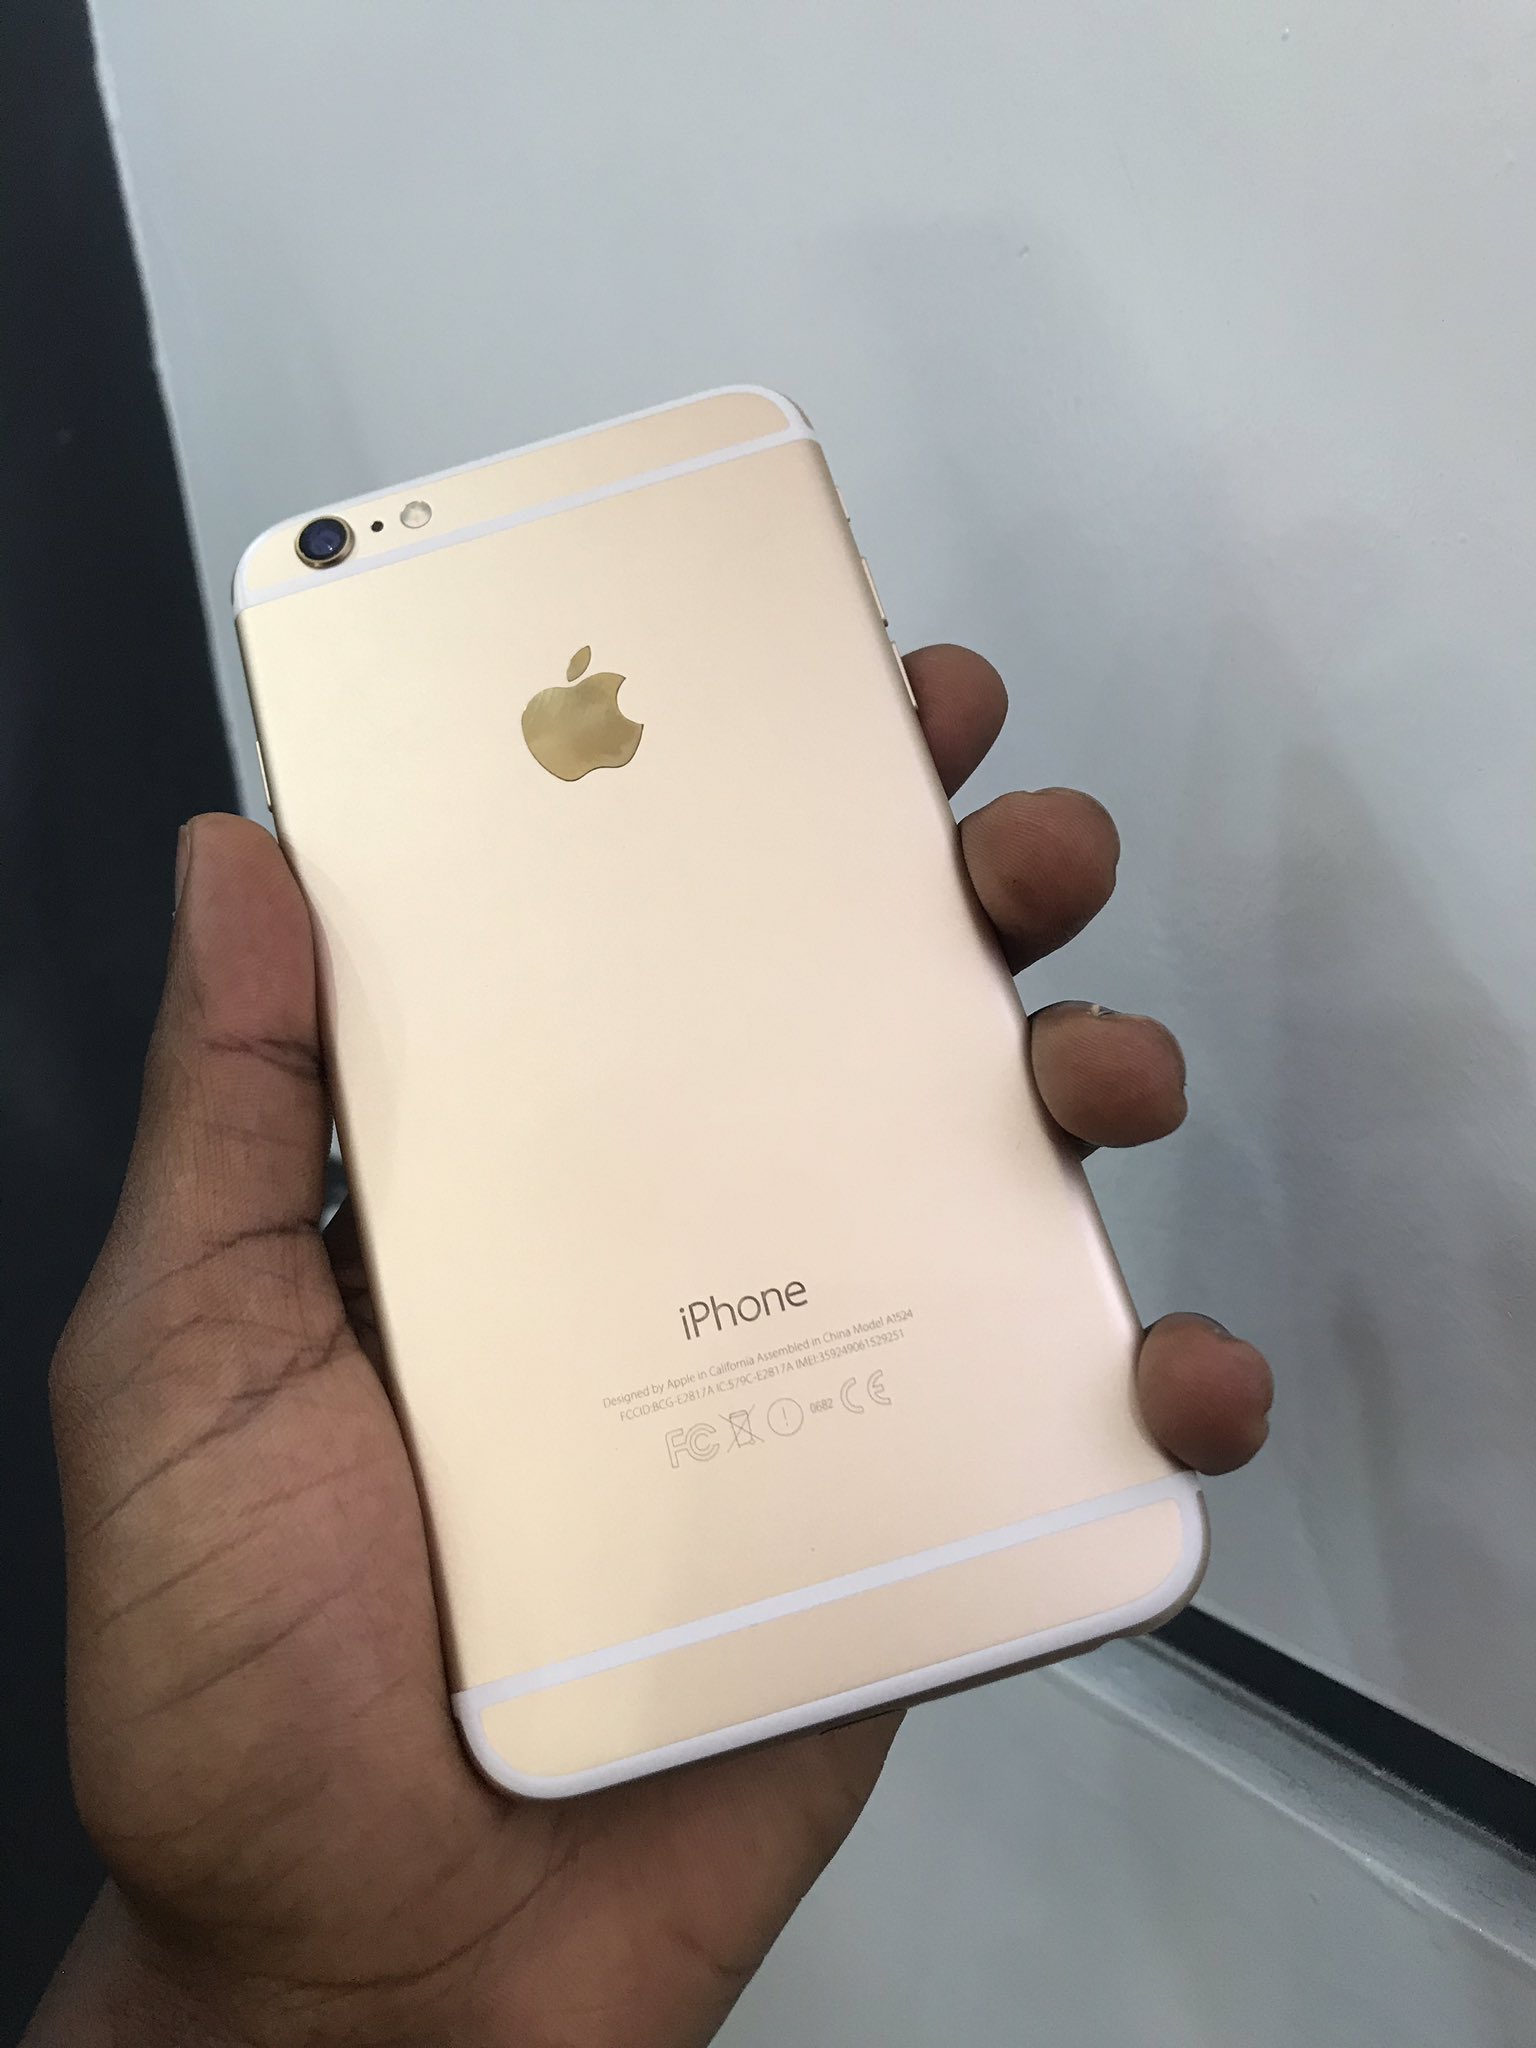 Obah Kindly Retweet Iphone 6 Plus Used From Uk 64gb Battery 100 Price 350 000 Mwenge